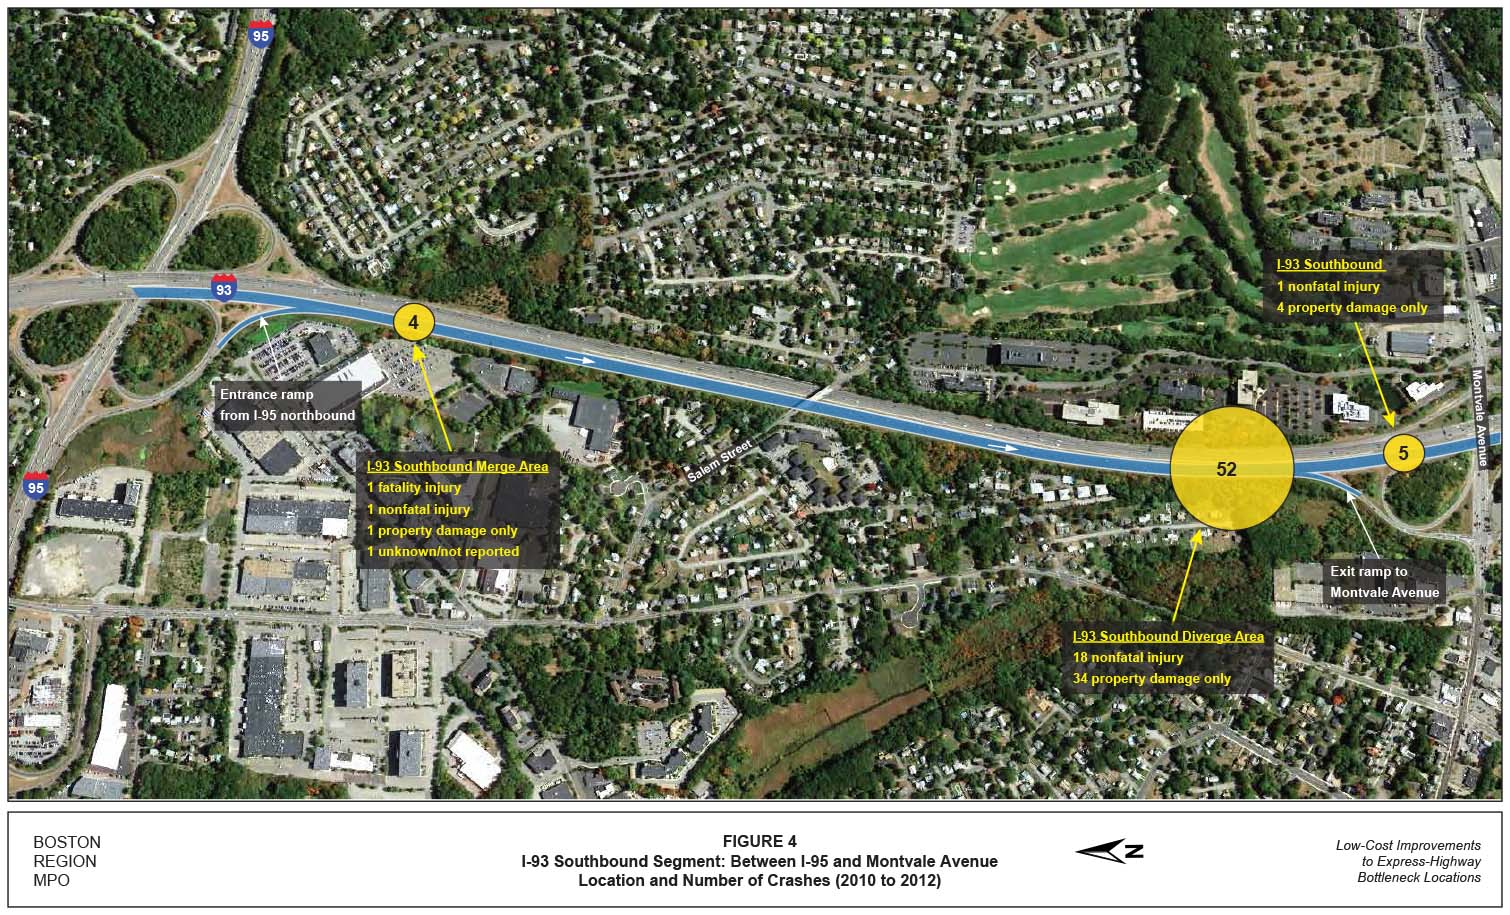 FIGURE 4. Aerial-view map showing the location and number of crashes for the I-93 southbound segment between I-95 and Montvale Avenue from 2010 to 2012

